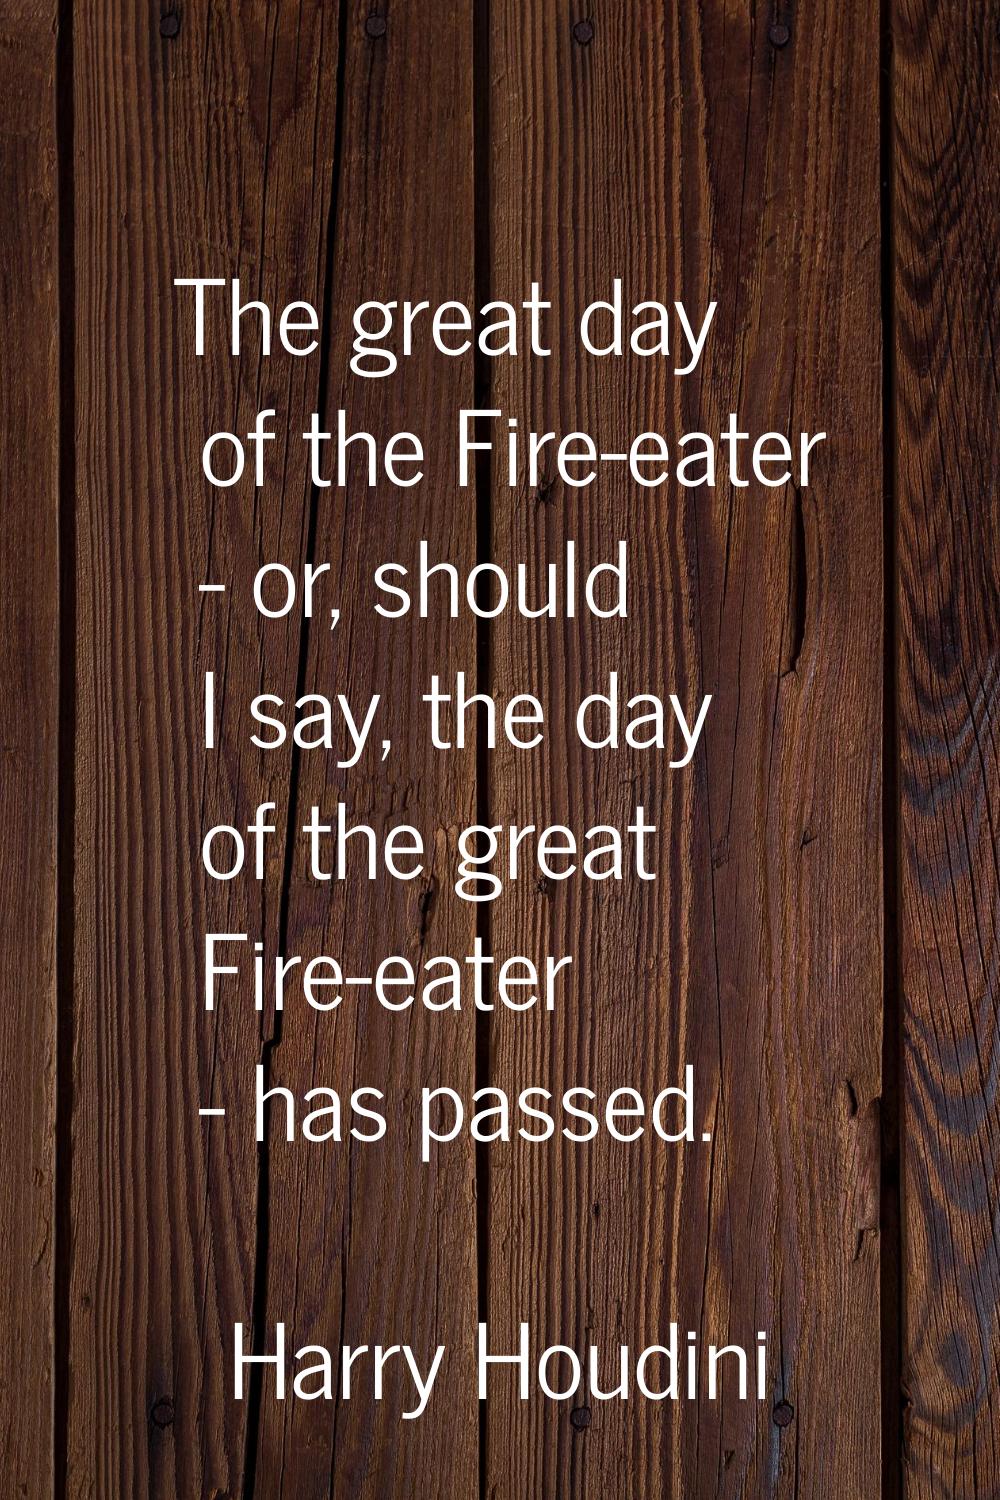 The great day of the Fire-eater - or, should I say, the day of the great Fire-eater - has passed.